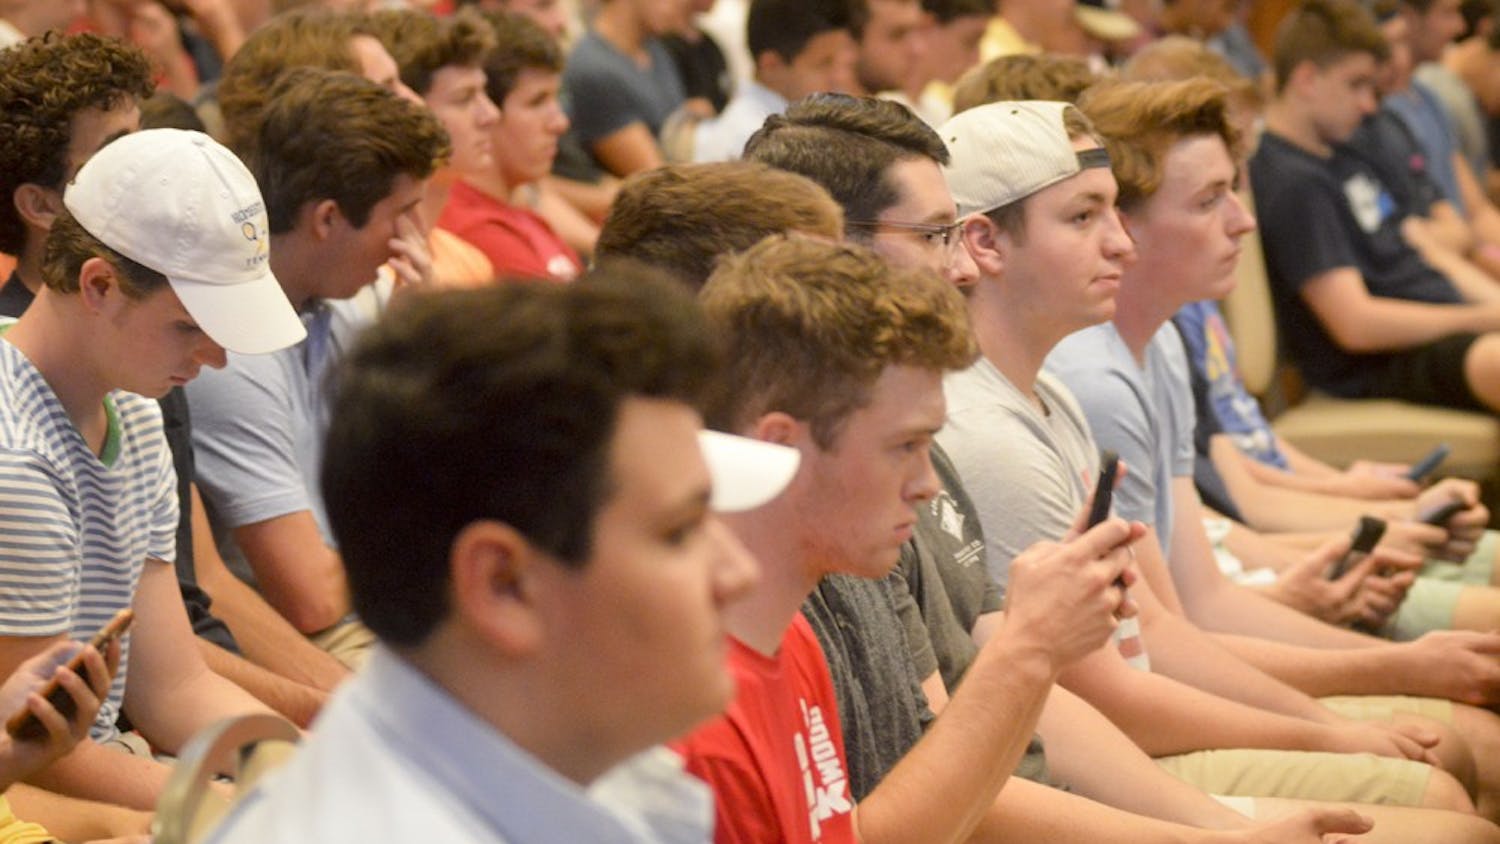 Freshmen prepare to register for fraternity rush during the Greek Orientation Seminar Tuesday evening at Alumni Hall. Hopeful first year students were informed on house tours, rush dues, and were told to beware of “fake” fraternities recruiting on campus such as the now infamous Alpha Tau Omega.